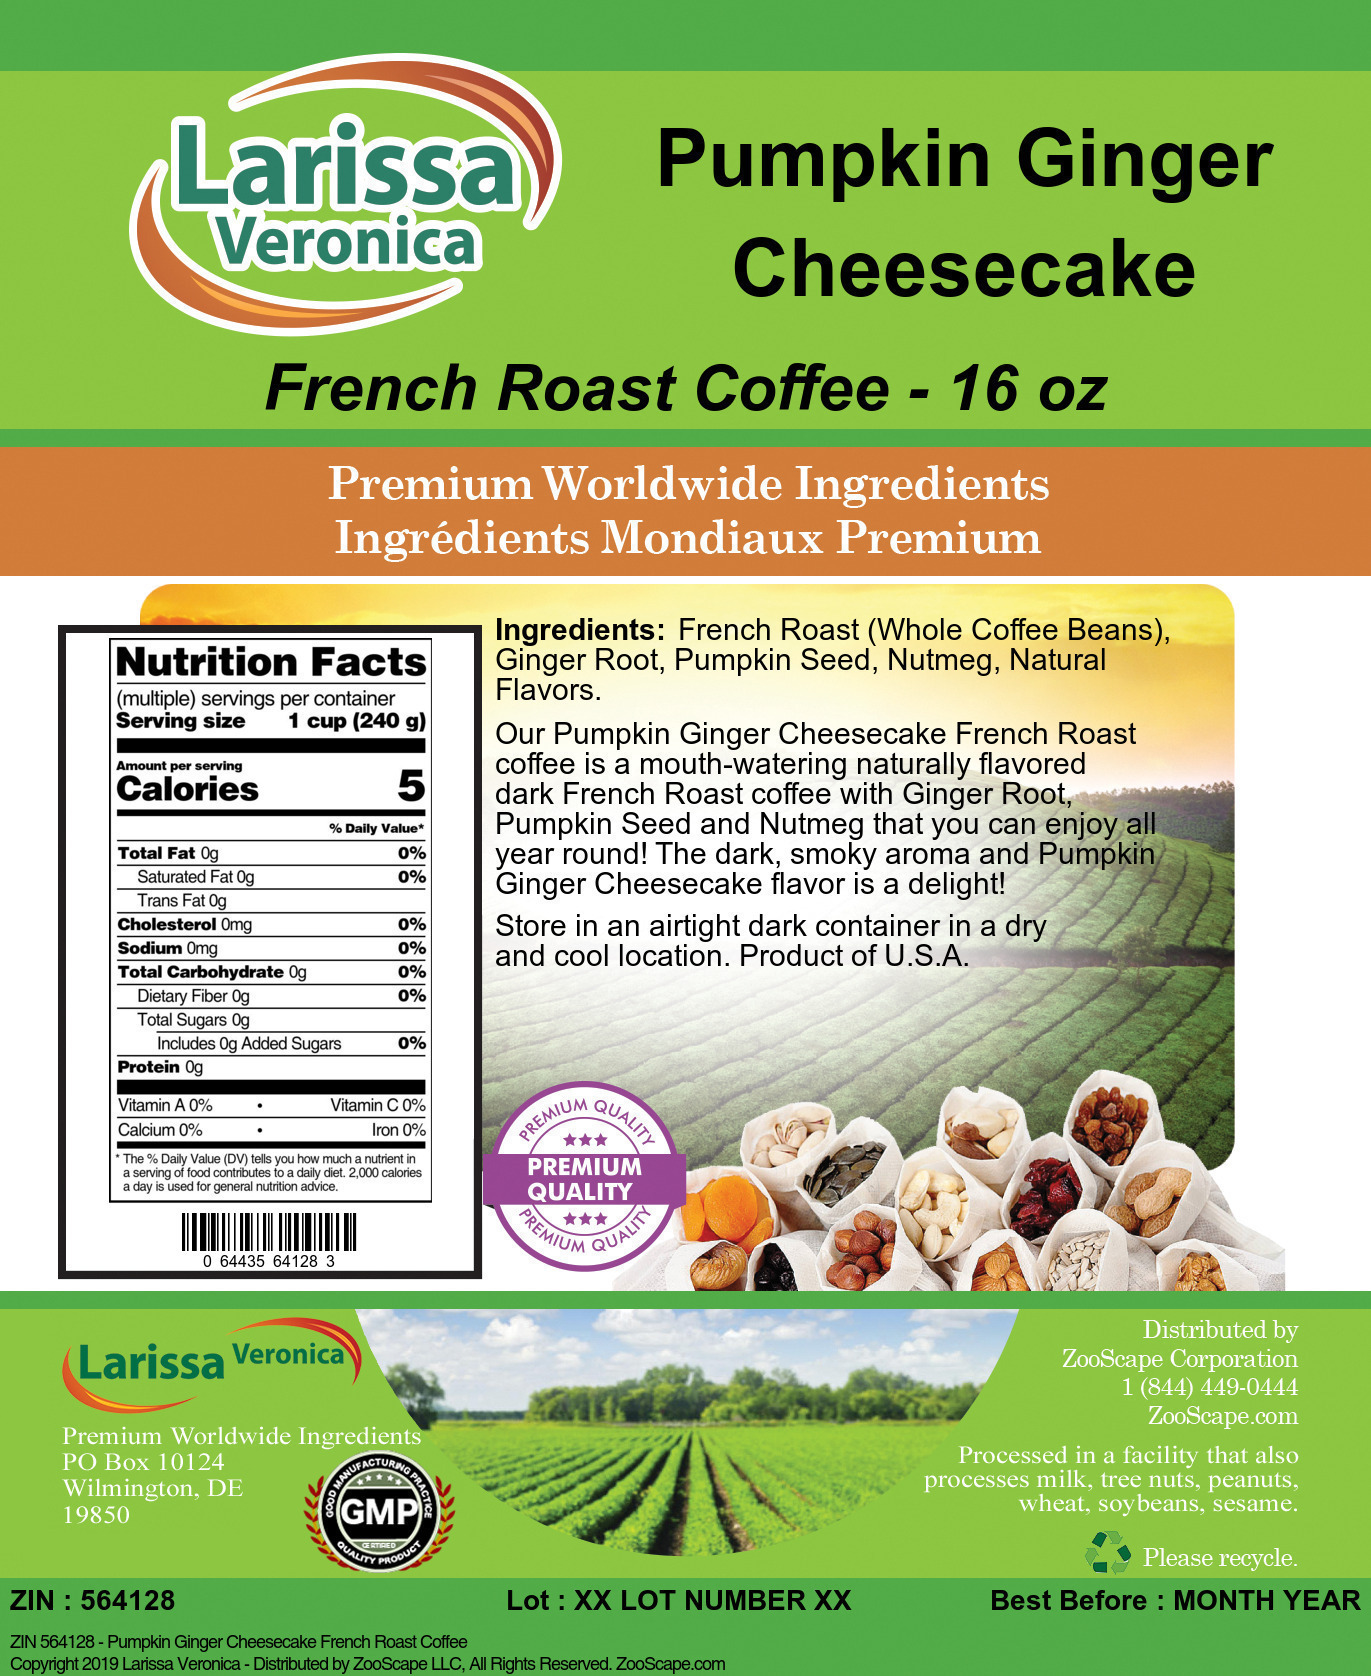 Pumpkin Ginger Cheesecake French Roast Coffee - Label